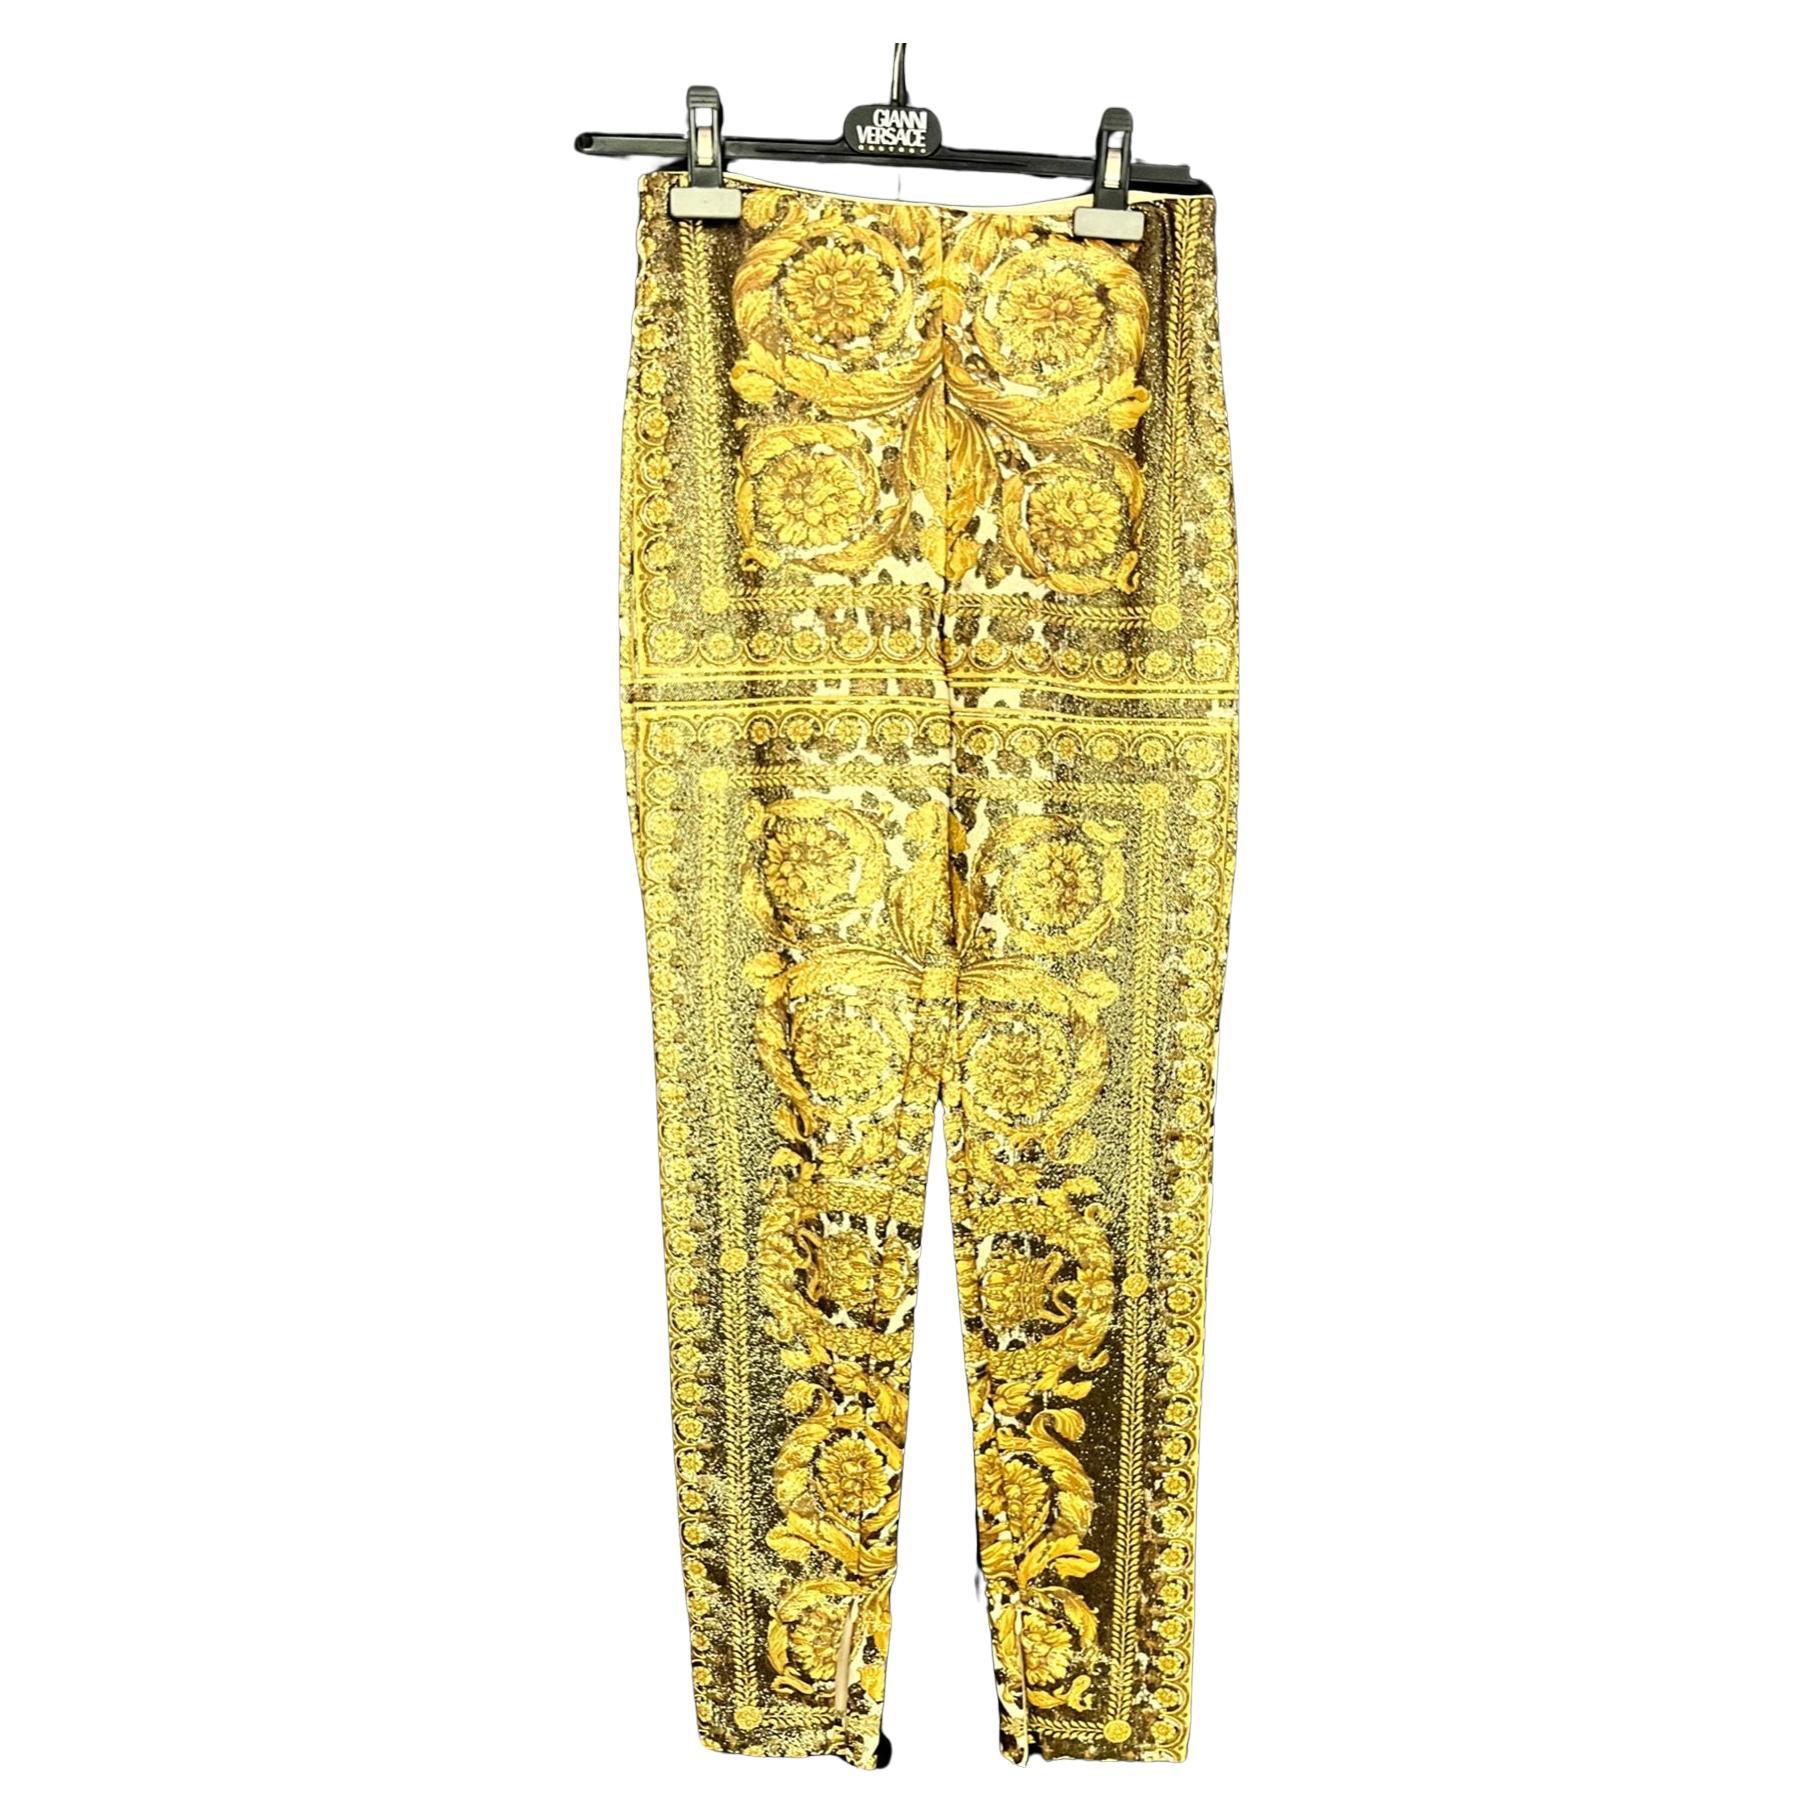 ANIMAL BAROQUE LEGGINGS from MIAMI MANSION GIANNI VERSACE PERSONAL COLLECTION